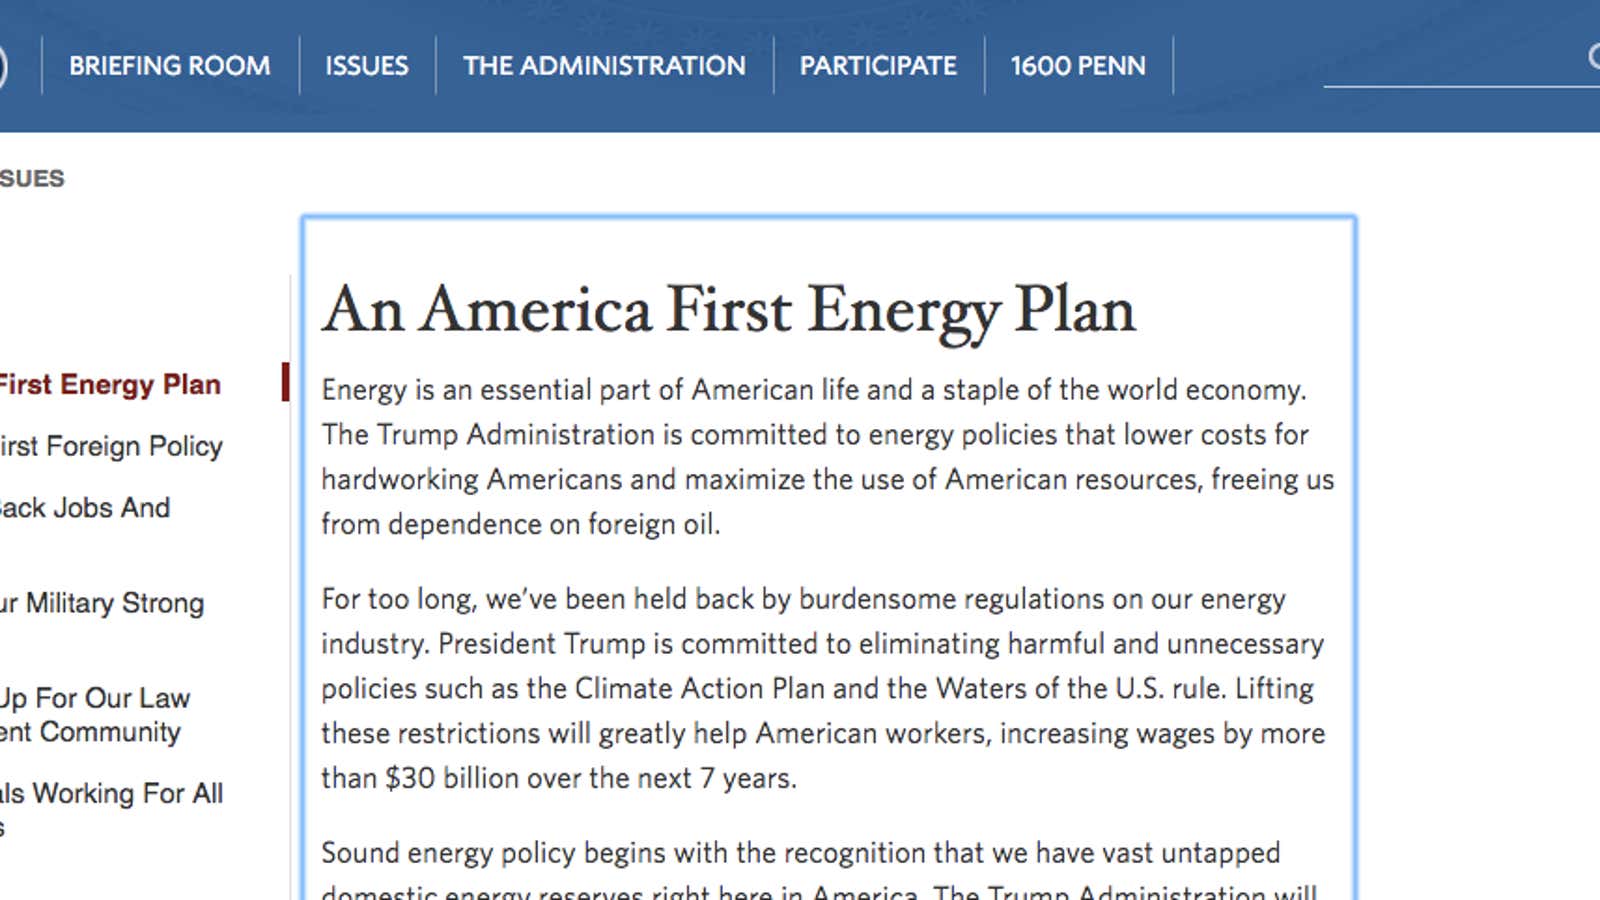 Trump’s administration intends to eliminate the Climate Action Plan